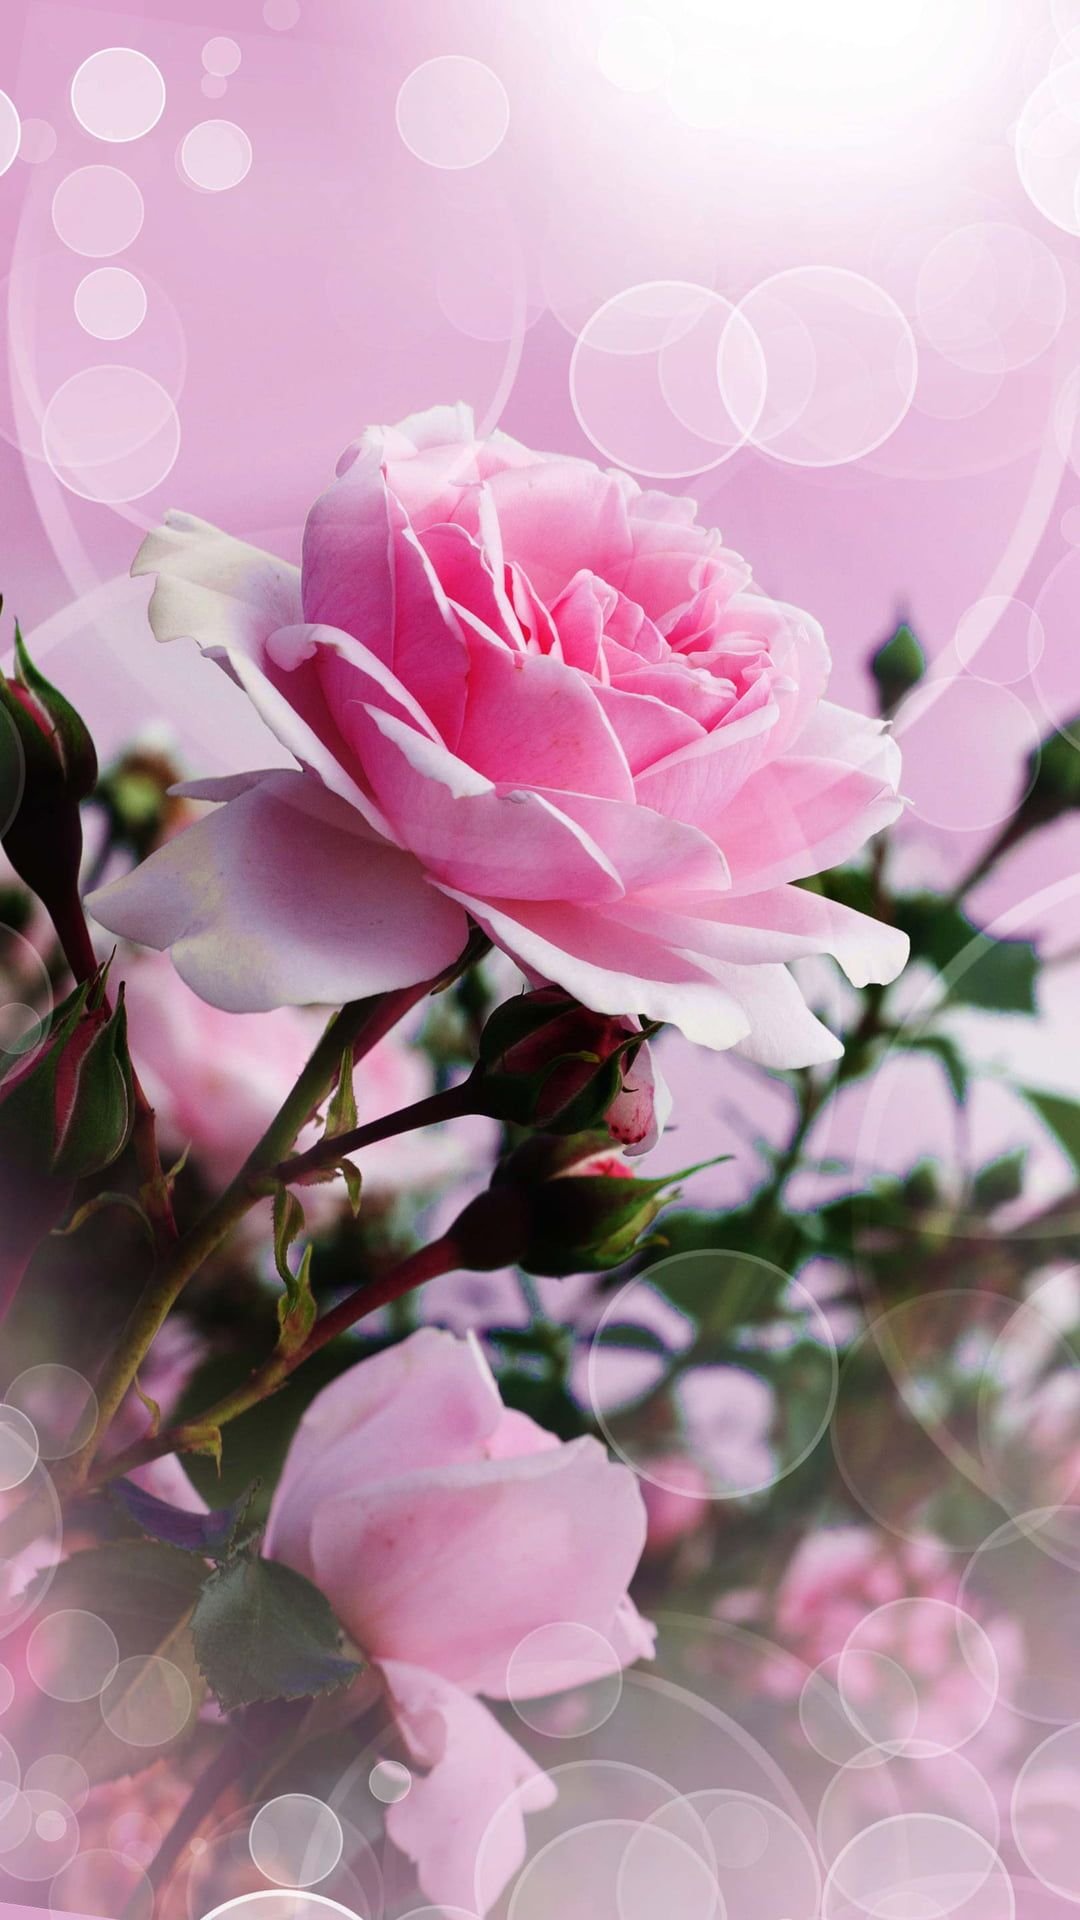 pink roses wallpaper for iphone